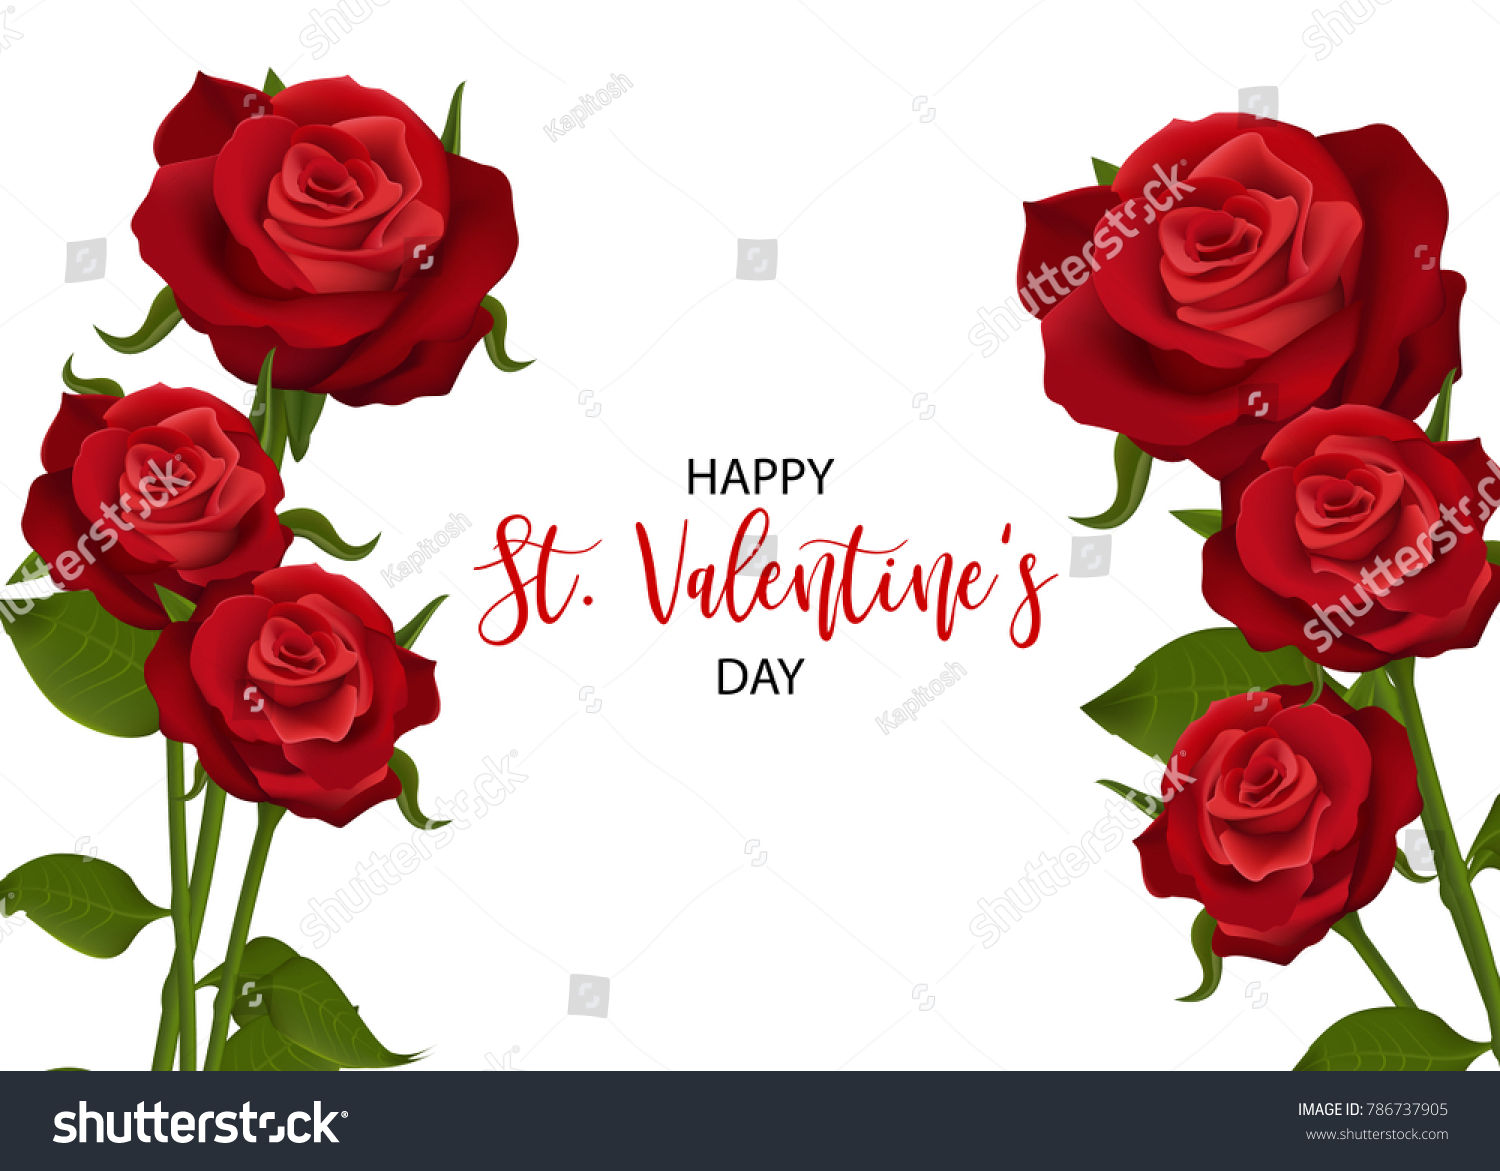 Realistic Red Rose St Valentines Day Stock Vector Royalty Free 786737905